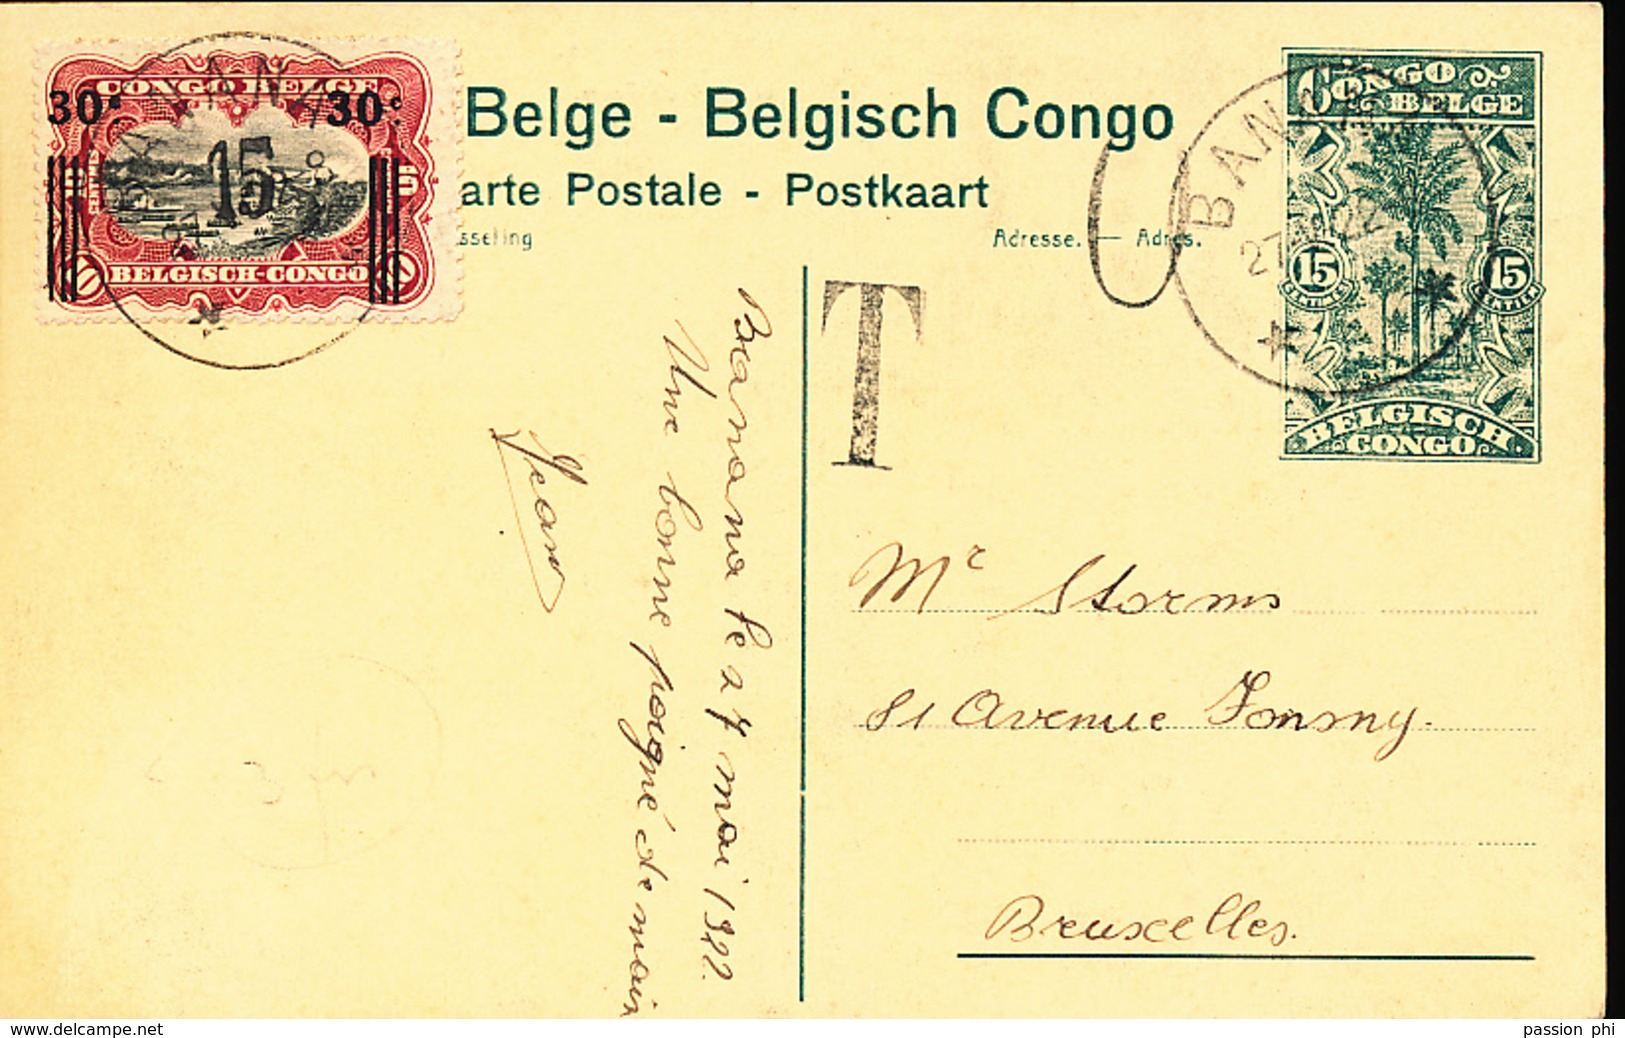 BELGIAN CONGO PPS 1922 ISSUE STIBBE 61 VIEW 84 USED BANANA 27.05.1922 UNOFFICIAL OVERPRINT ON THE STAMP O NUL + T - Ganzsachen